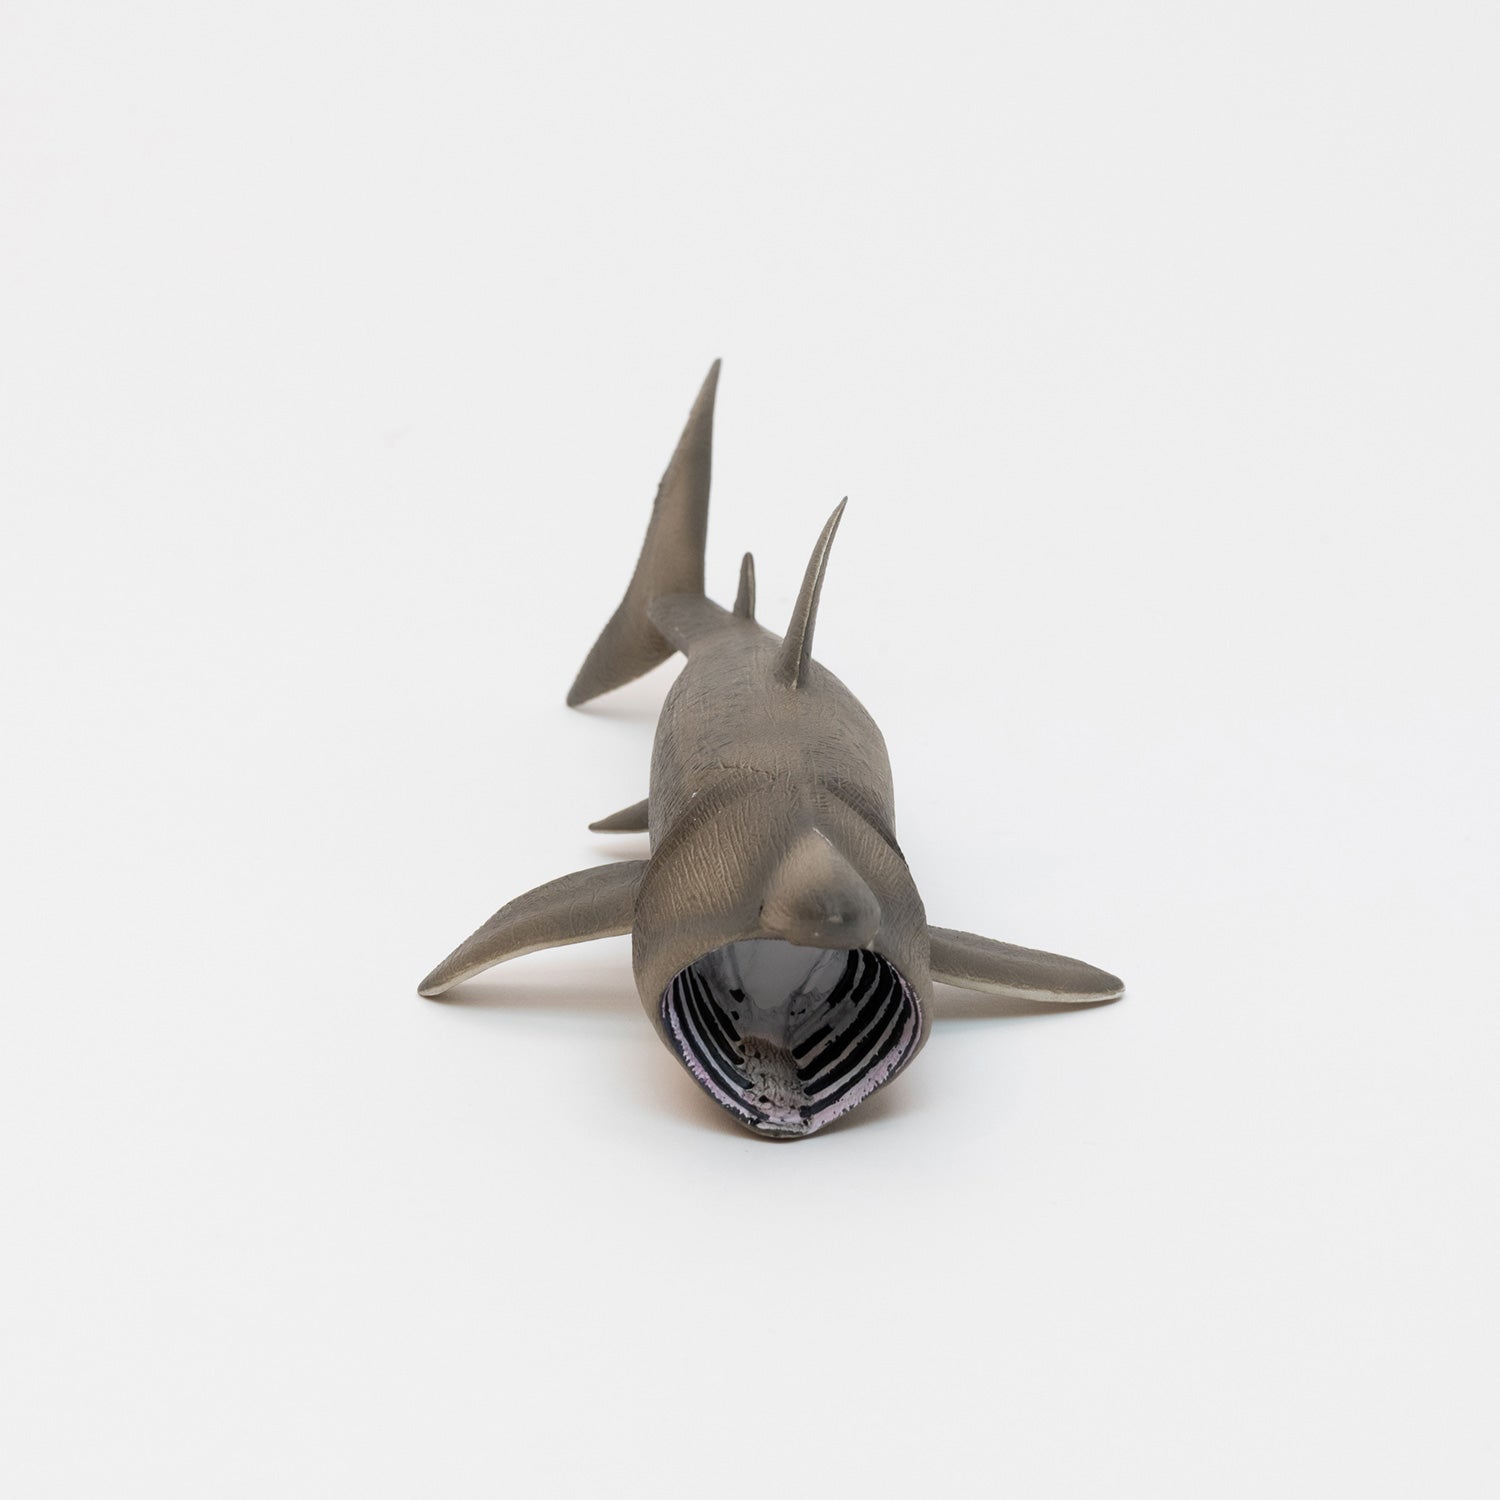 A basking shark plastic toy on a white background.